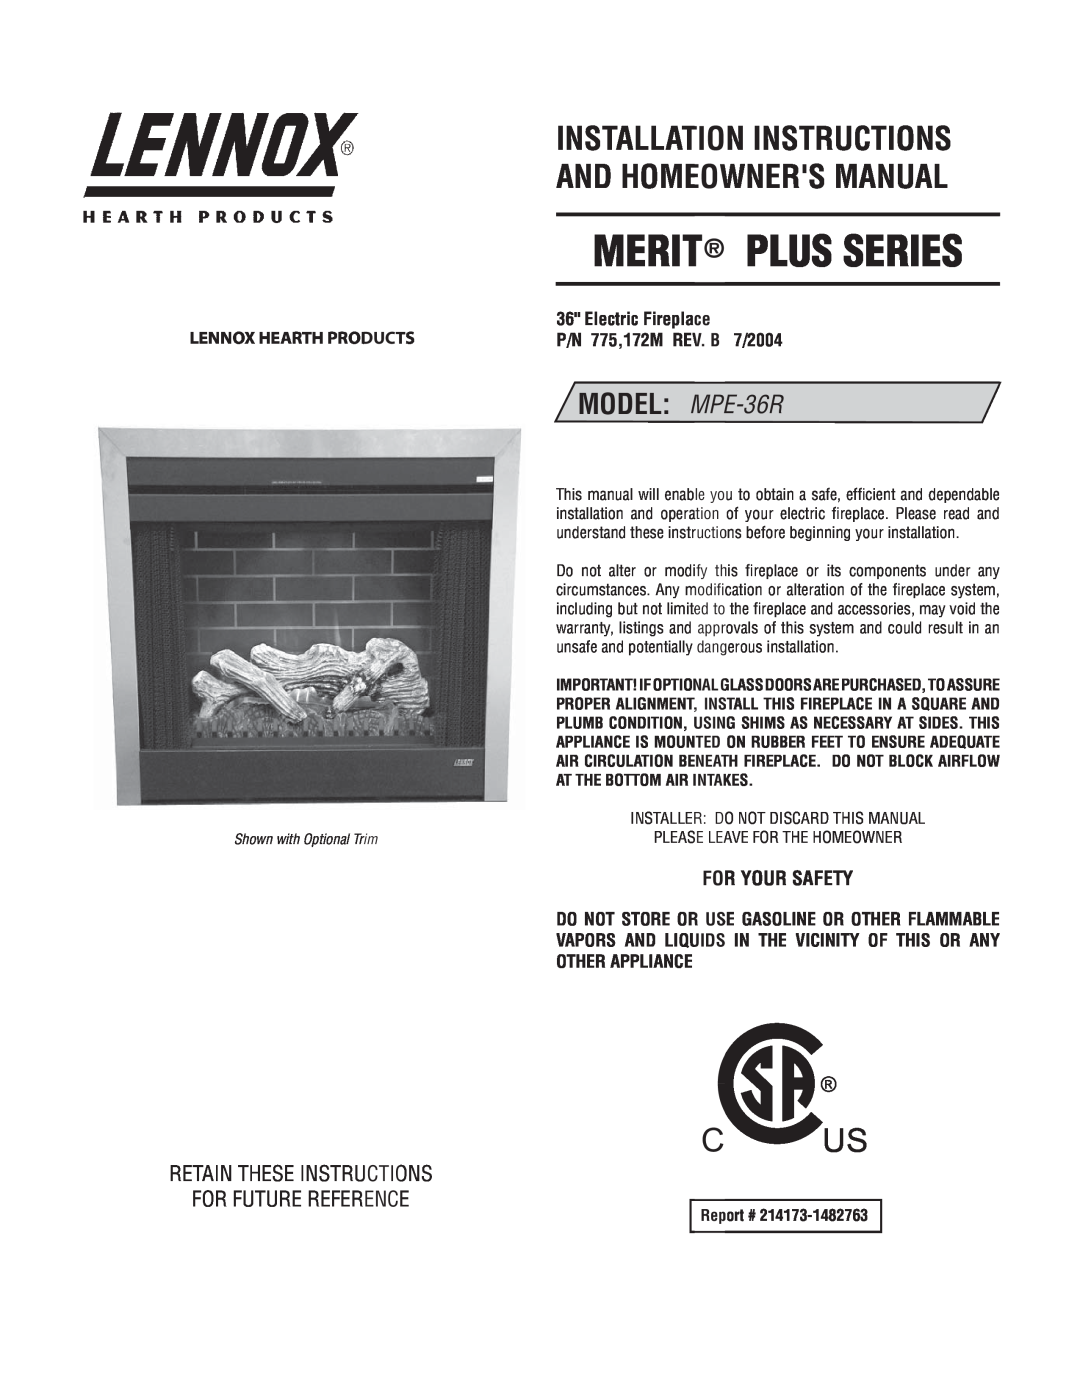 Lennox Hearth MPE-36R installation instructions For Your Safety, Electric Fireplace P/N 775,172M REV. B 7/2004, C Us 